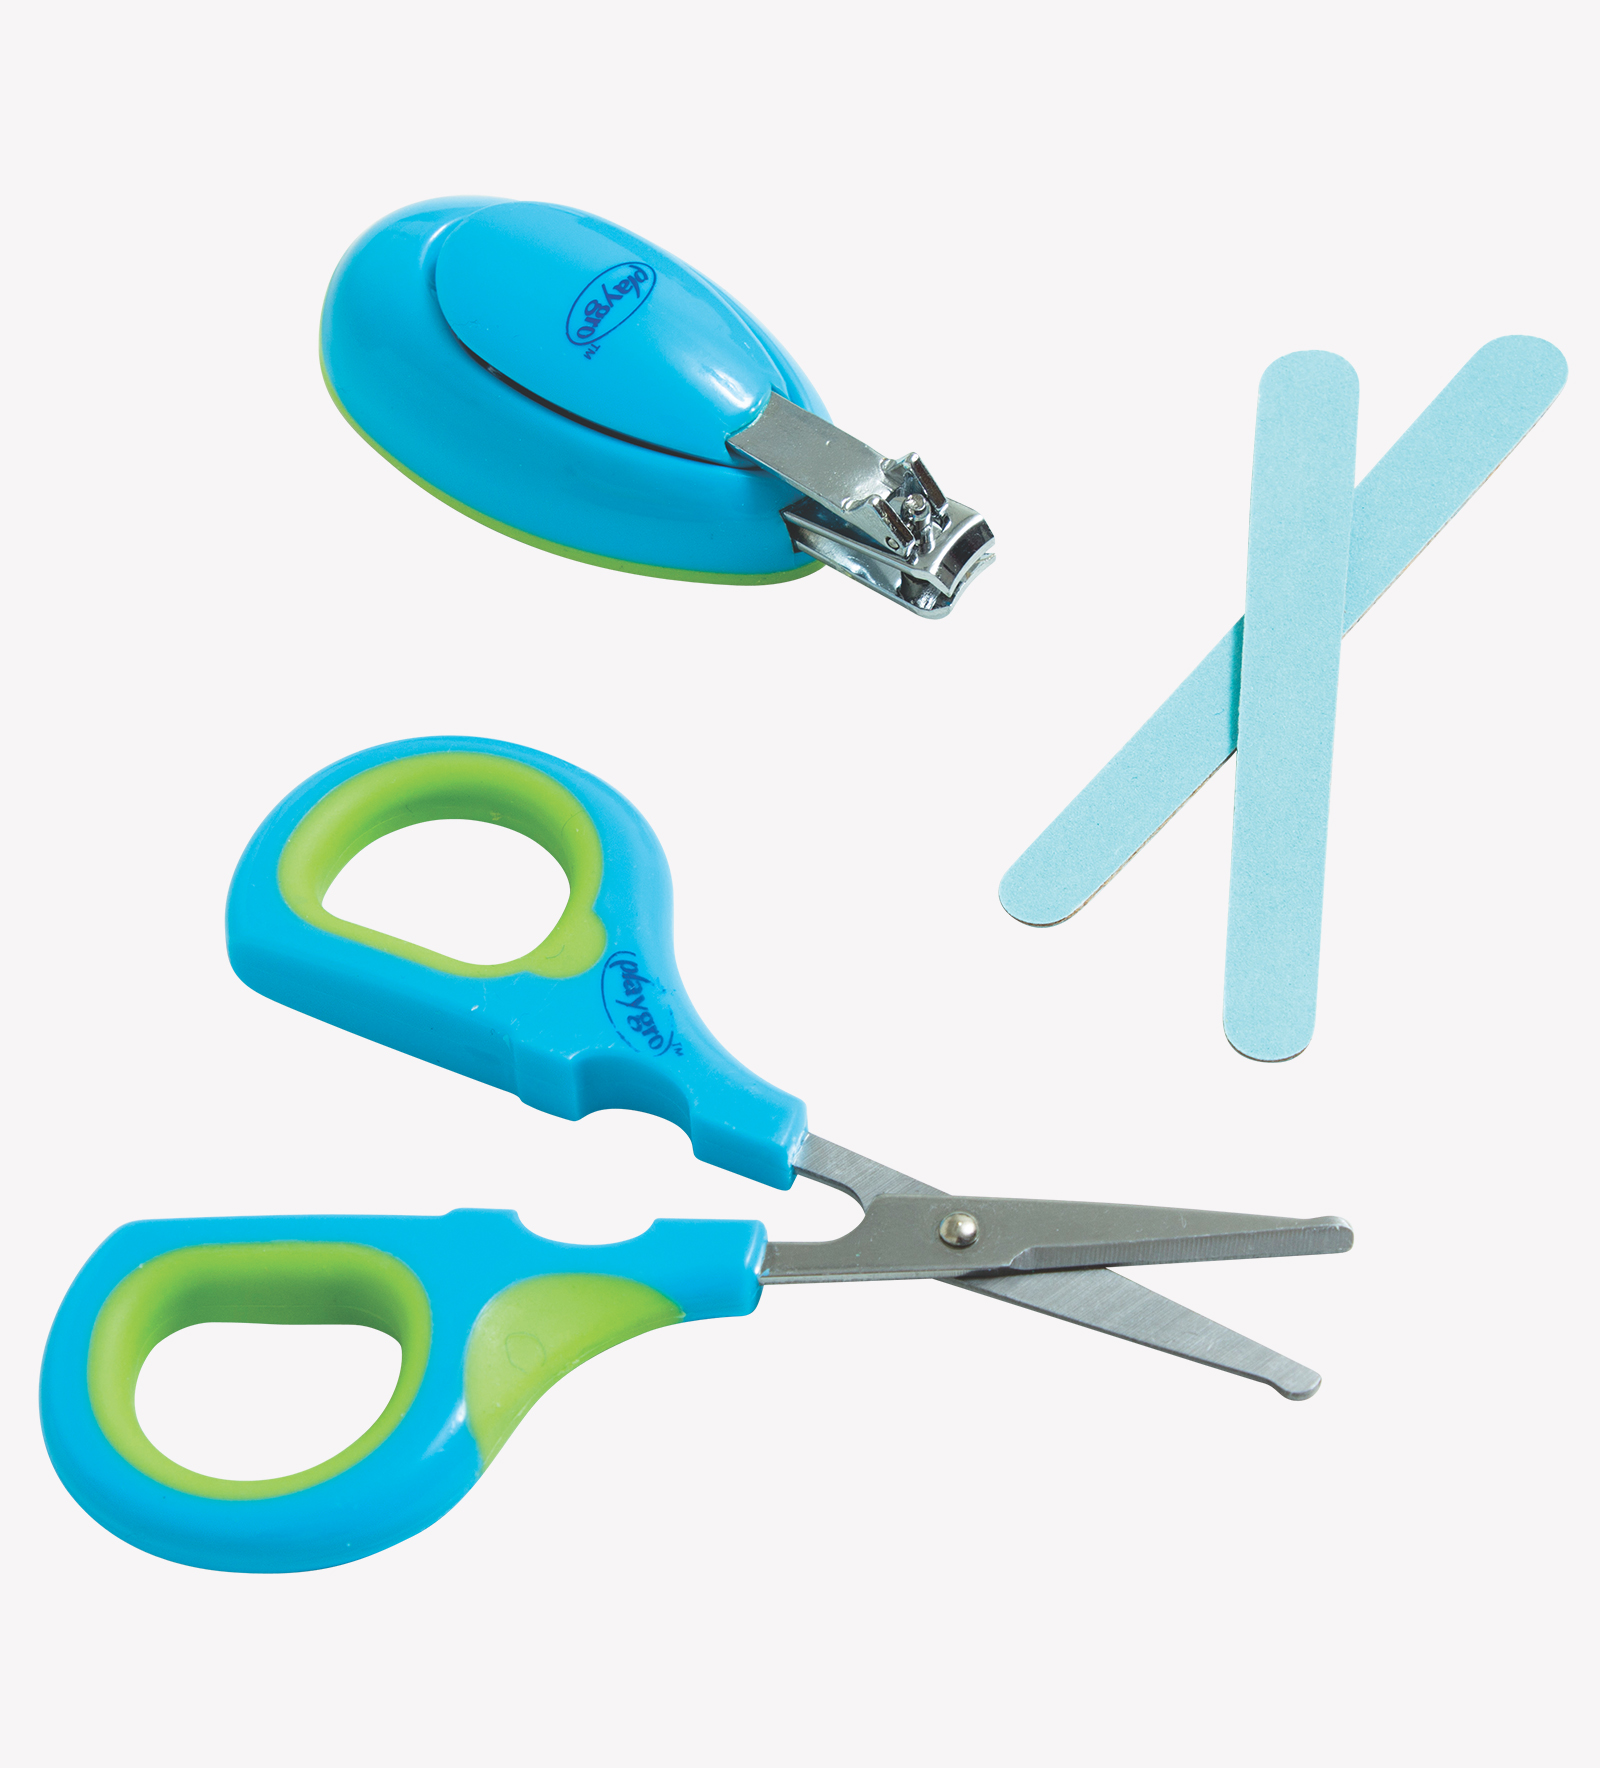 Buy Baby Nursing Care Kits Grooming Health Care Manicure Set Baby Nail Care  Practical Trimmer Convenient Daily from Jinhua Bestcare Supplies Co., Ltd.,  China | Tradewheel.com